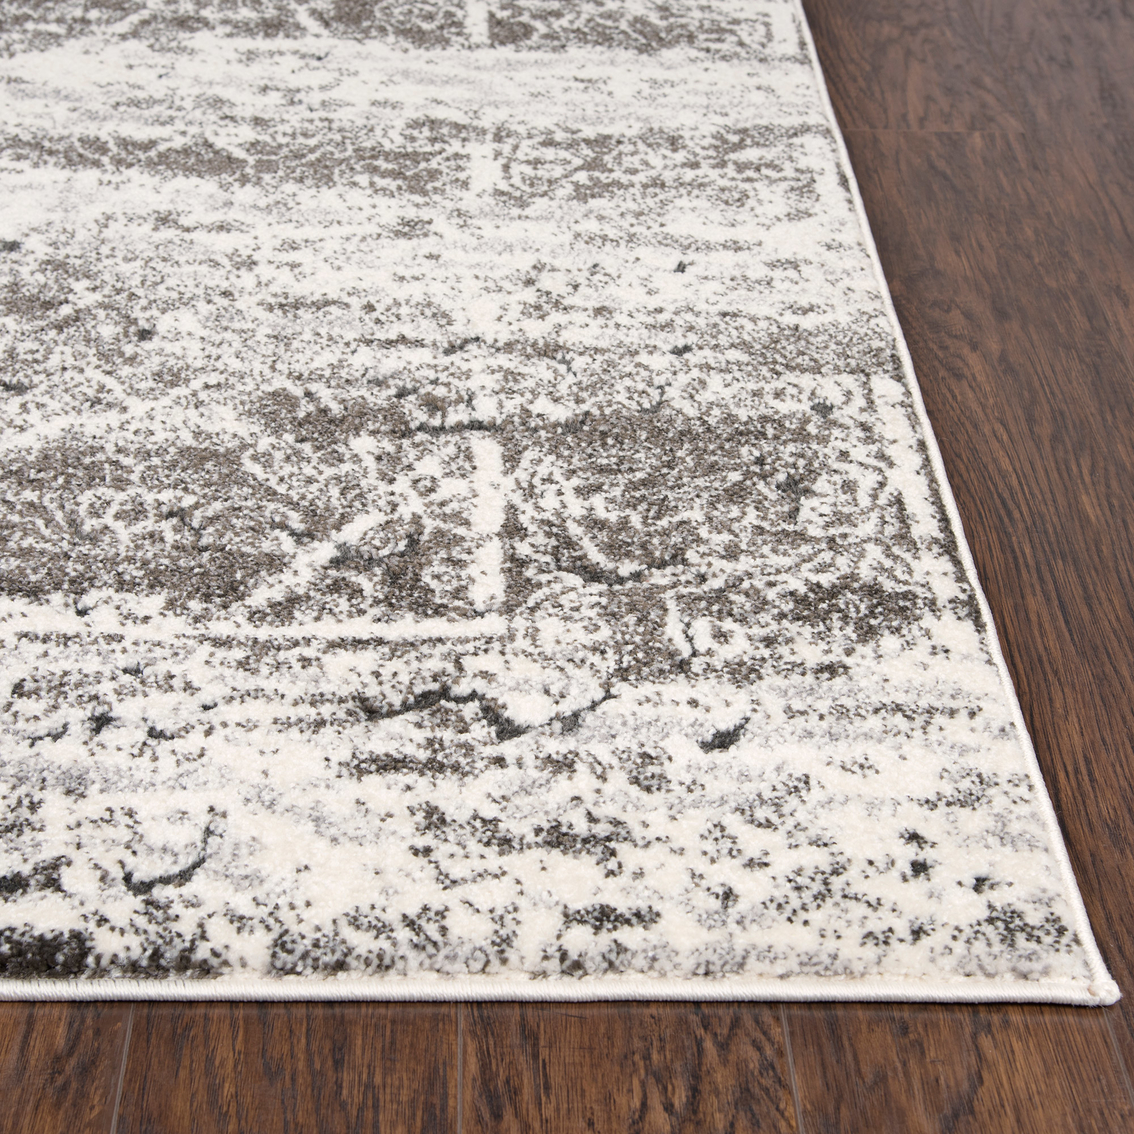 Rizzy Home Valencia Taupe Abstract Area Rug - Image 4 of 6